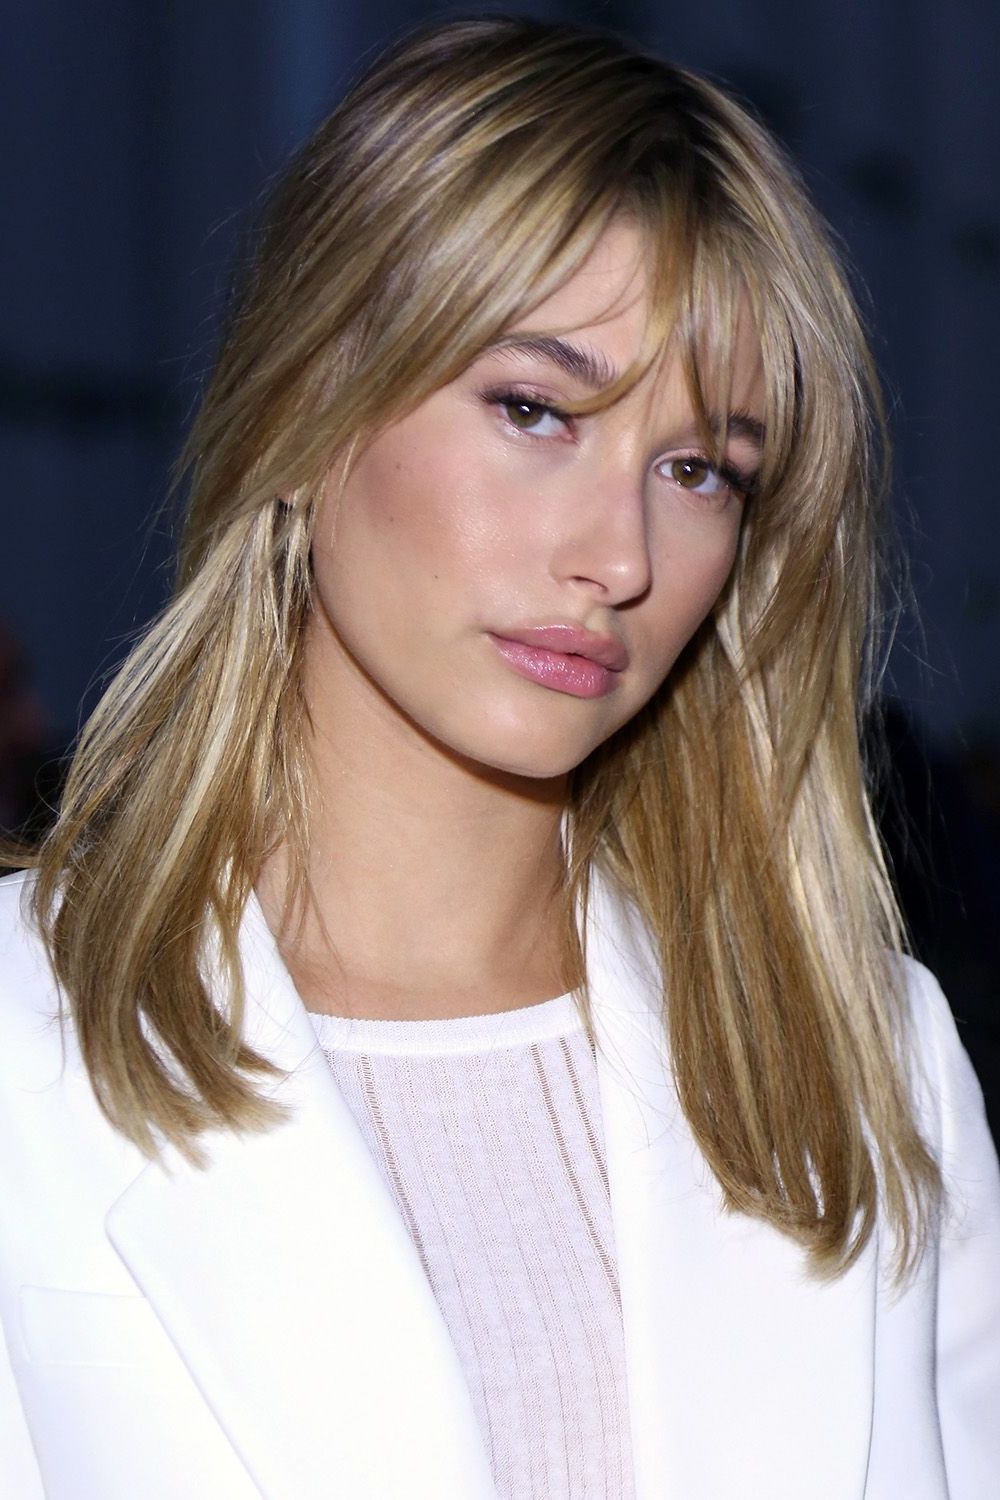 Most Current Medium Haircuts Styles With Bangs For 40 Best Medium Hairstyles – Celebrities With Shoulder Length Haircuts (View 10 of 20)